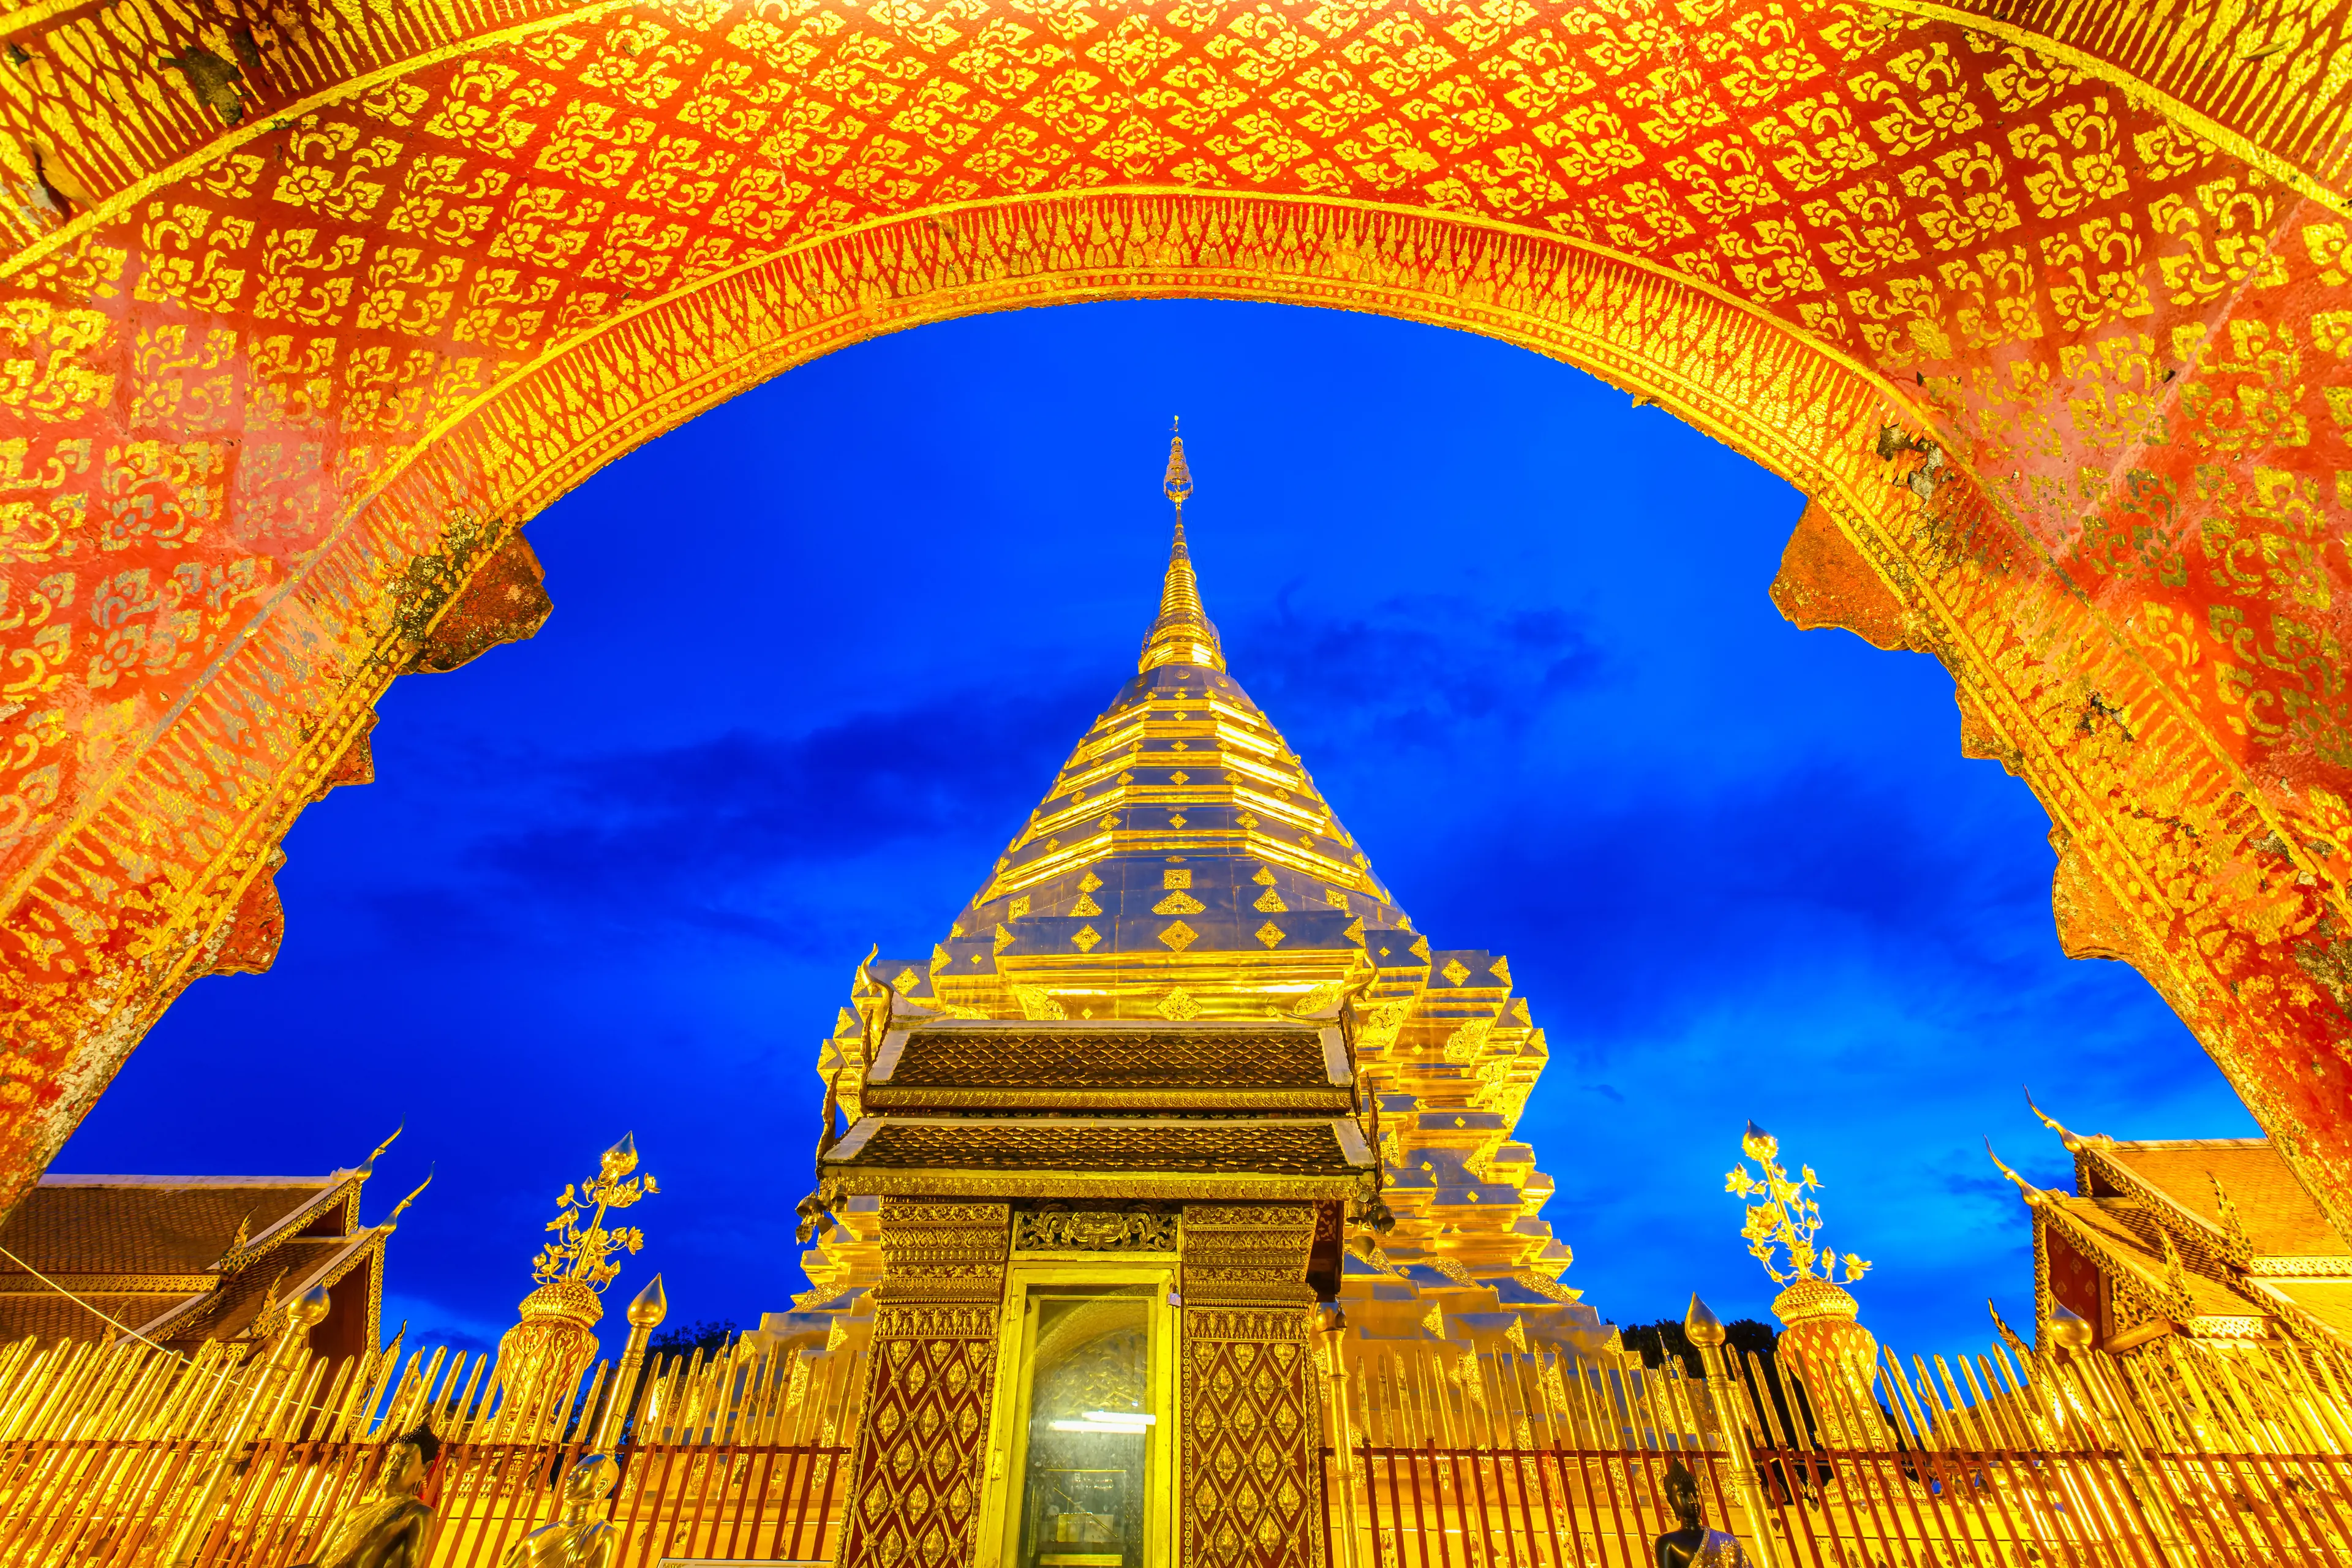 4-Day Chiang Mai, Thailand Adventure Itinerary